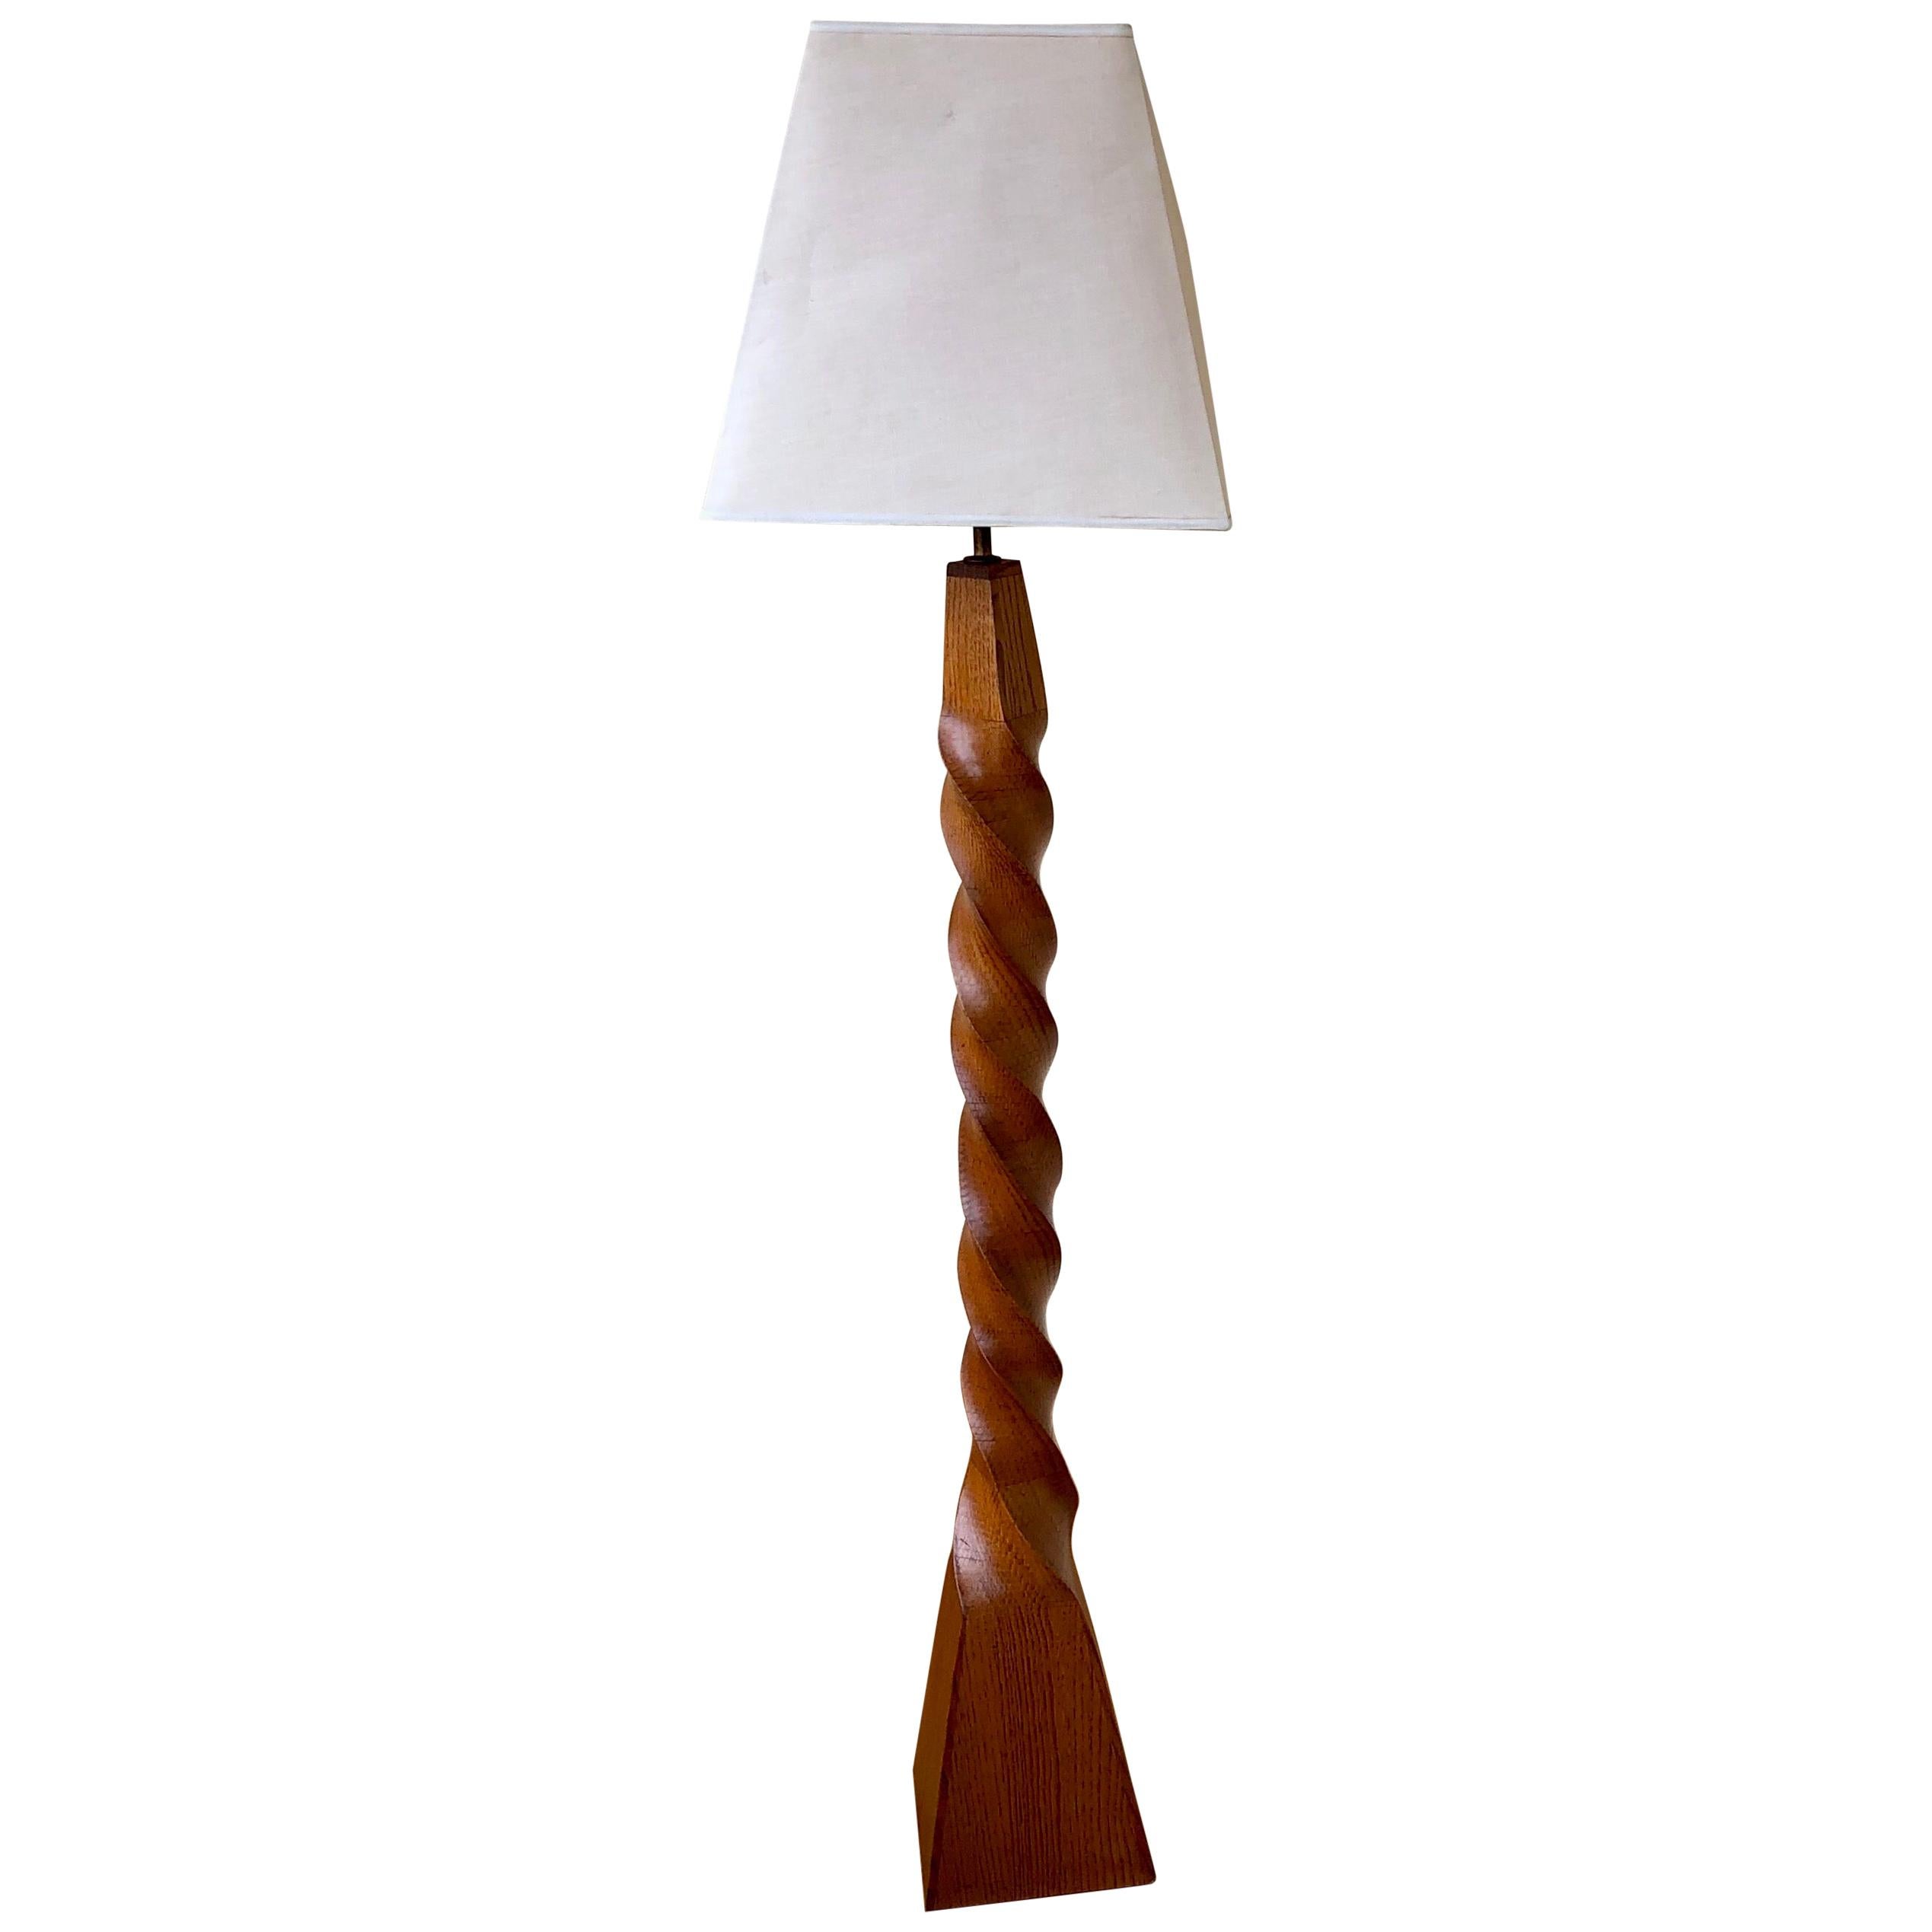 Majestic Unique Twisted Sculpted Wood Floor Lamp 